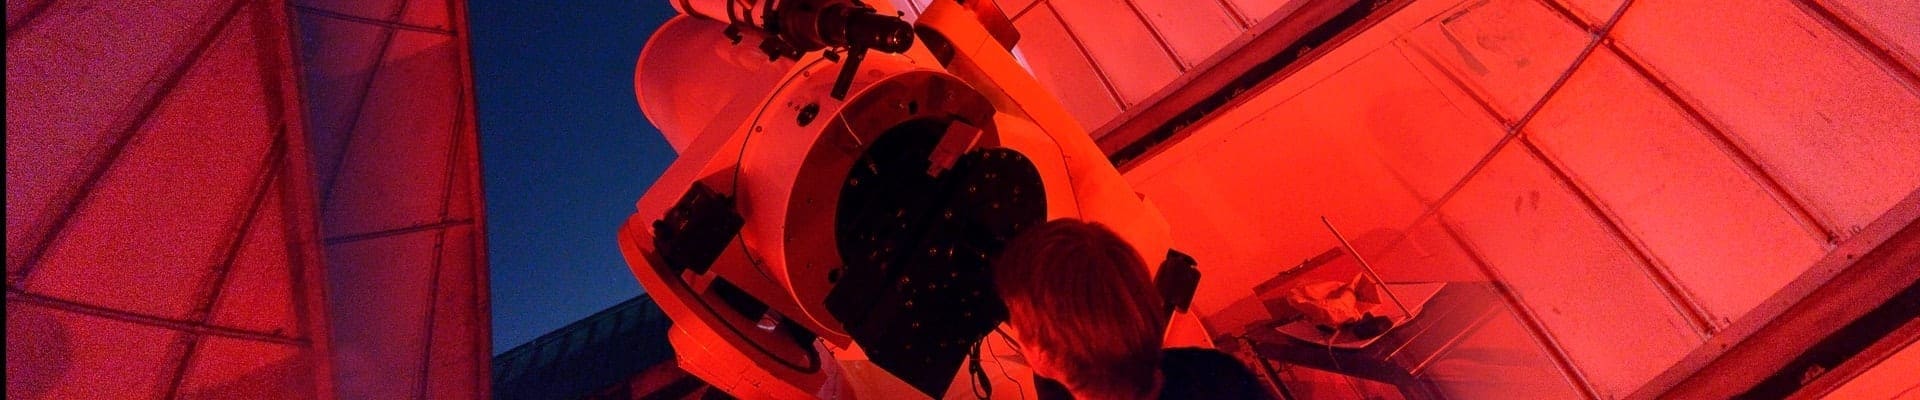 person at a huge telescope in a red-lit room